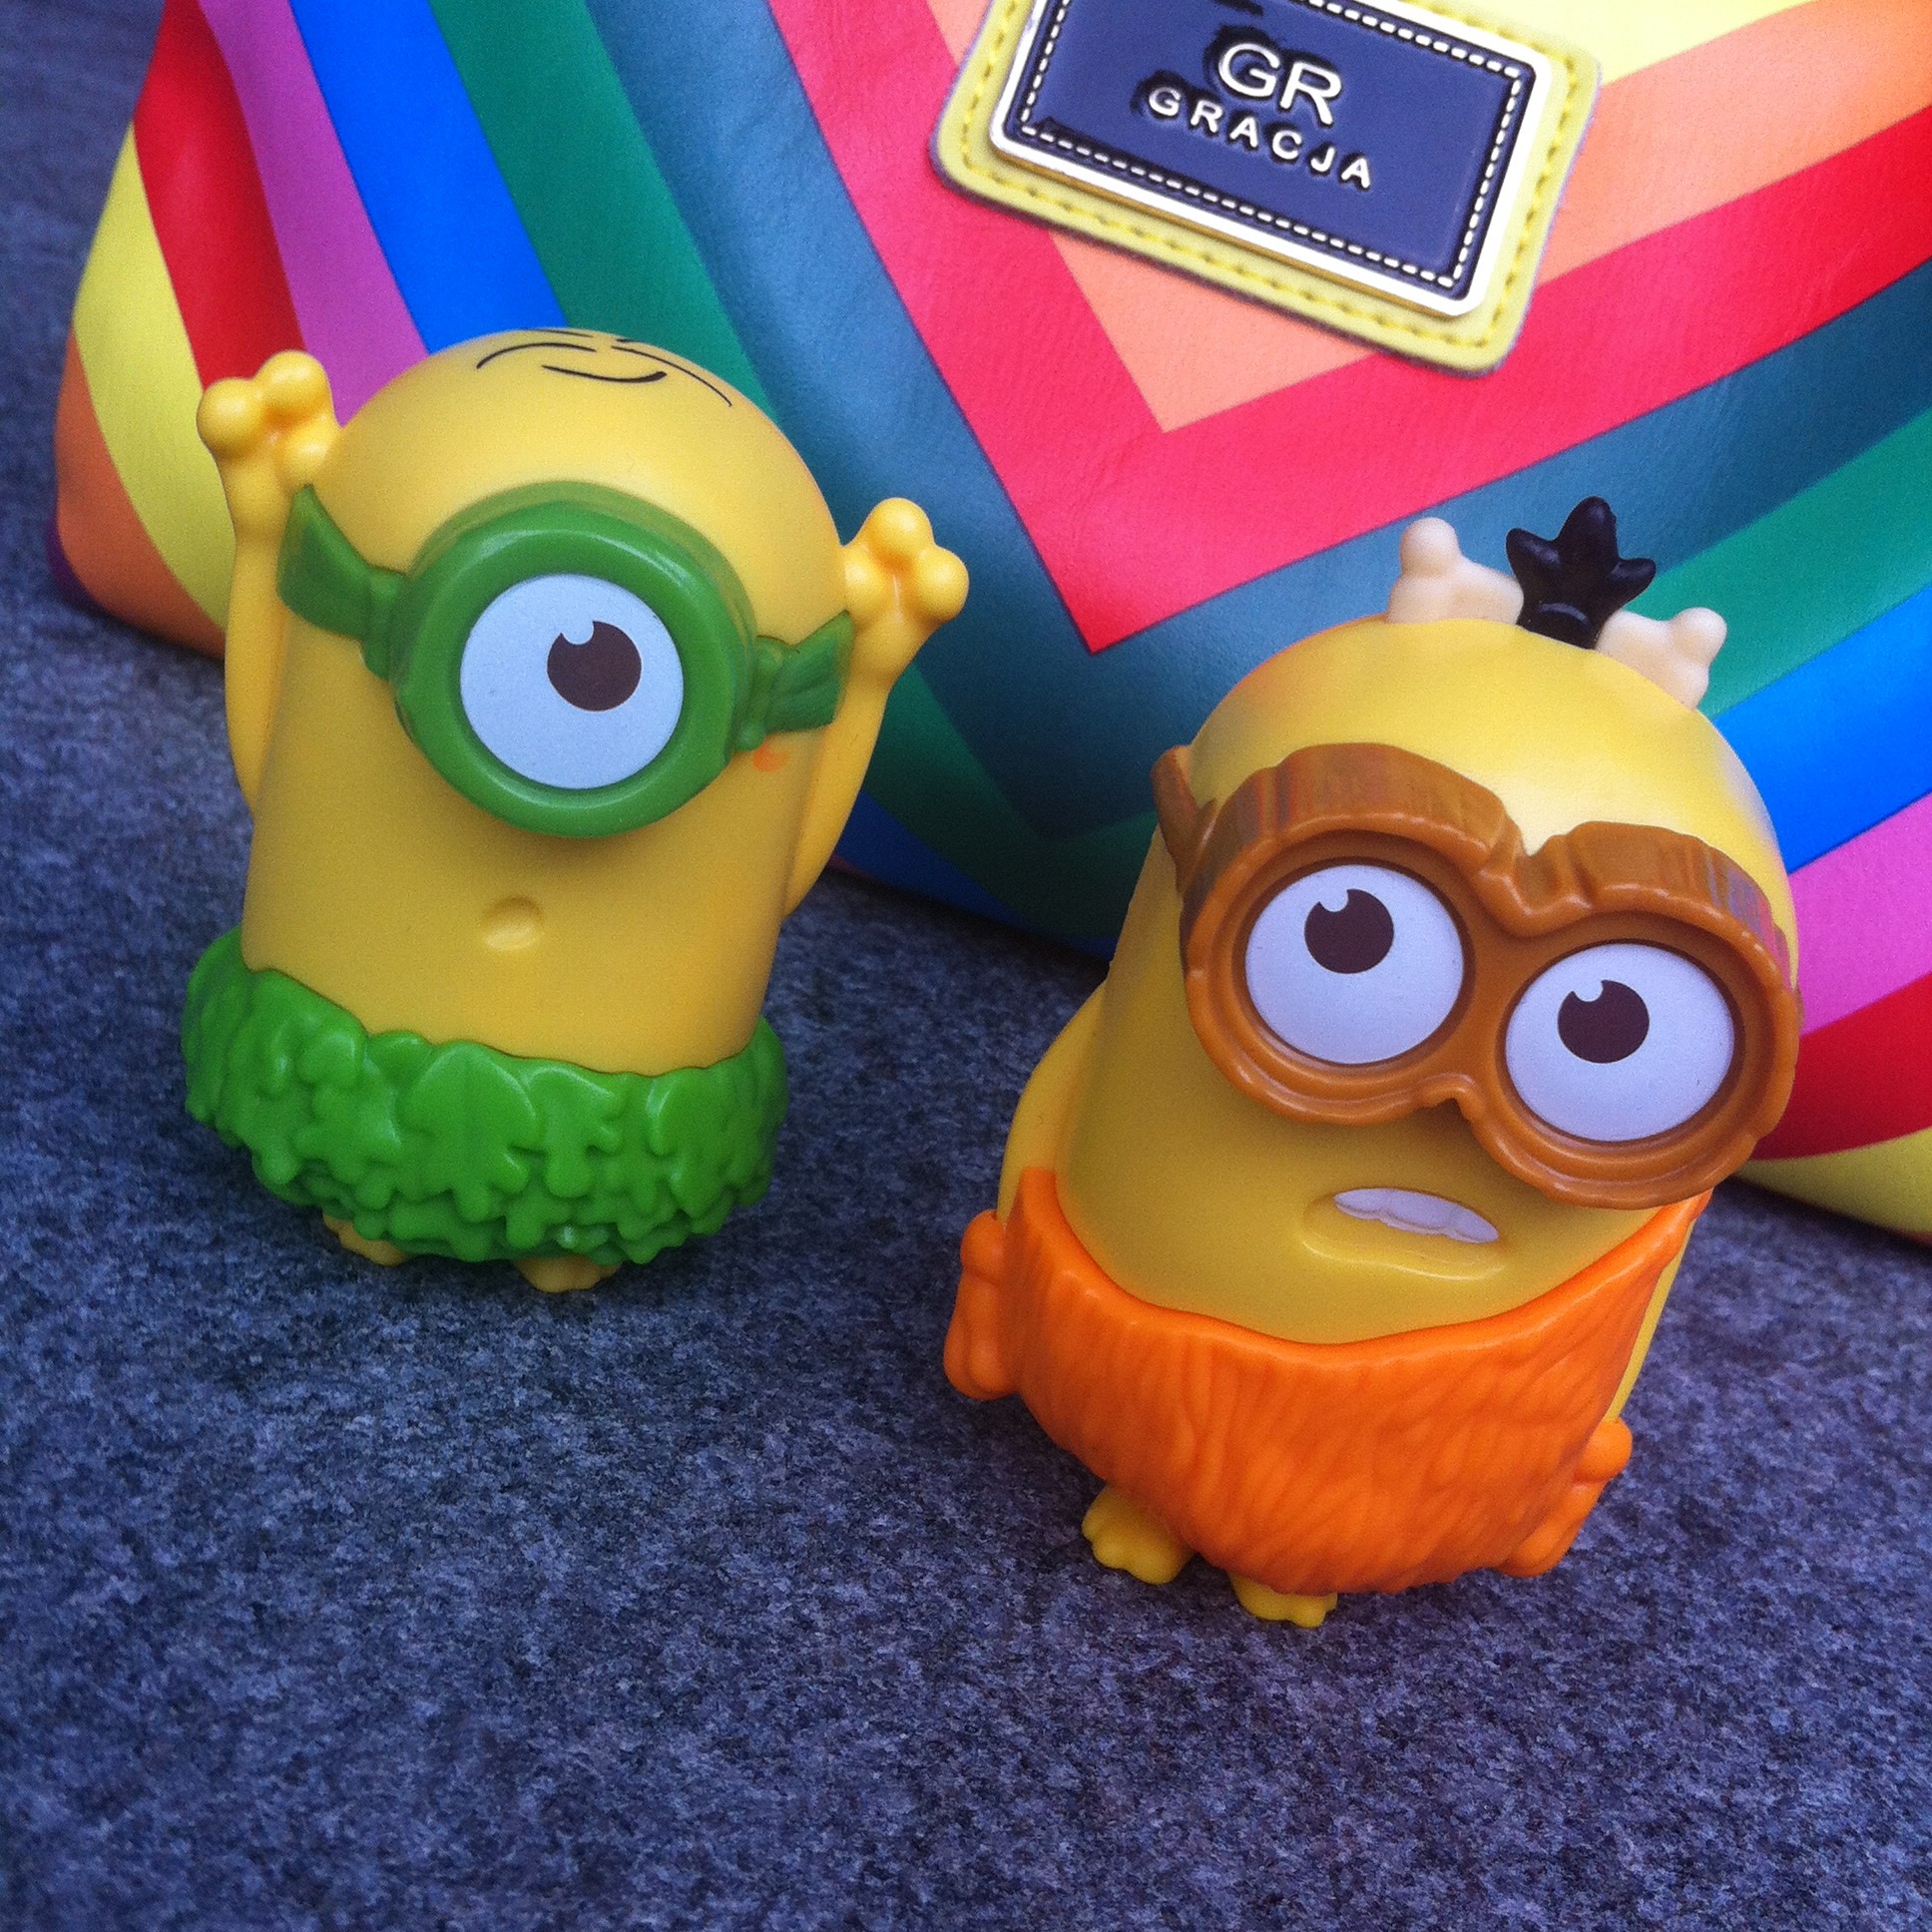 These two watched it with us! Get them from McDonald with the happy meal :)